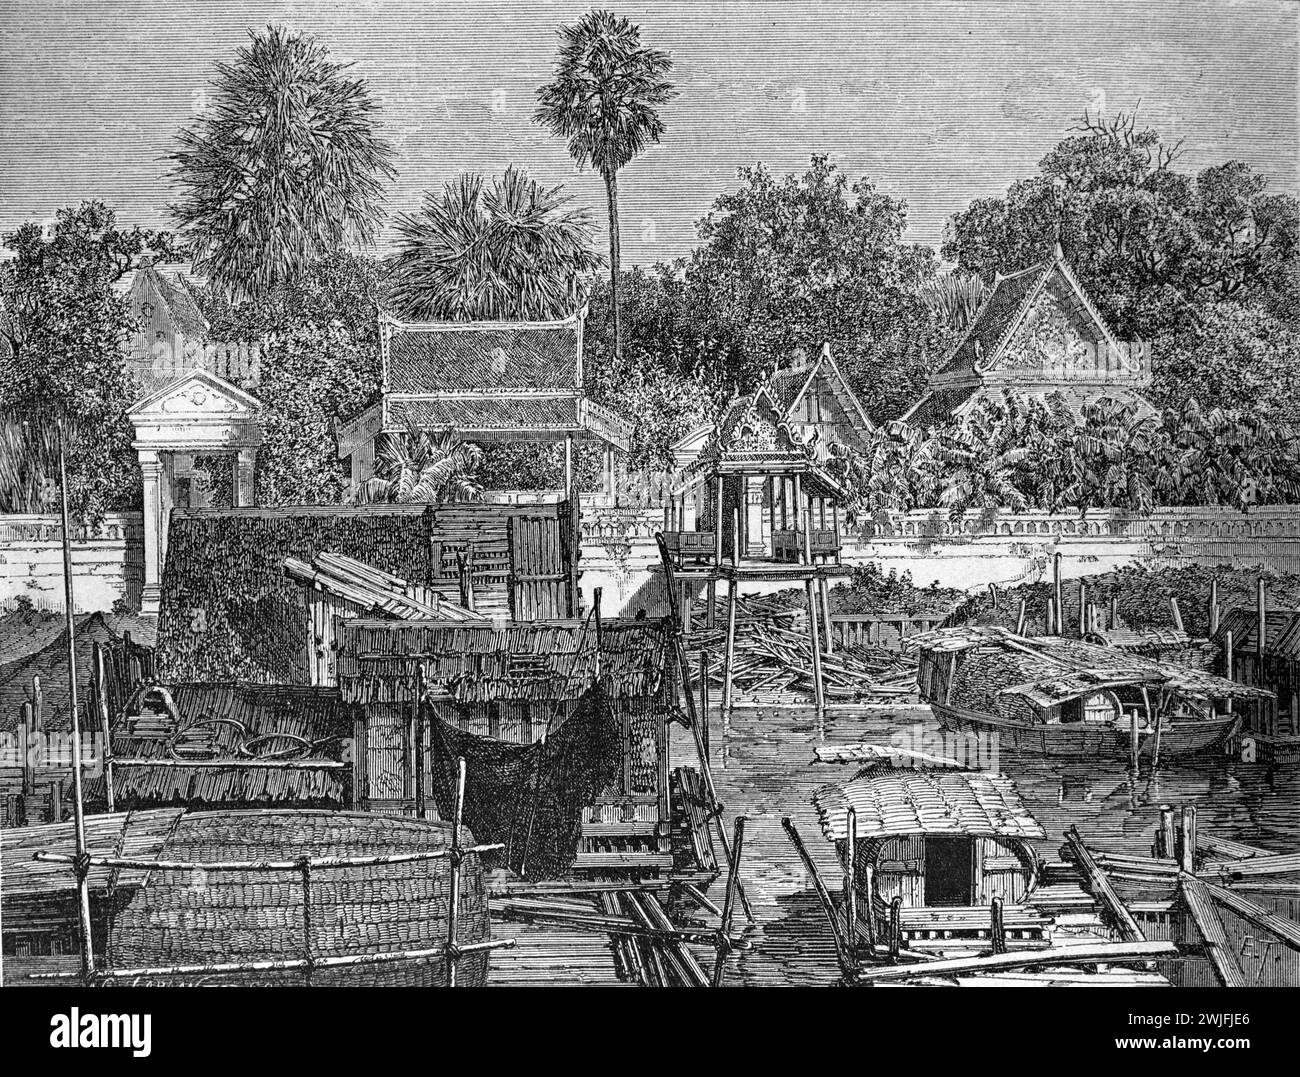 Wooden Boats, Cut Logs, Floating Village and Thai Temple Along the Ayutthaya Canal Thailand. Vintage or Historic Engraving or Illustration 1863 Stock Photo